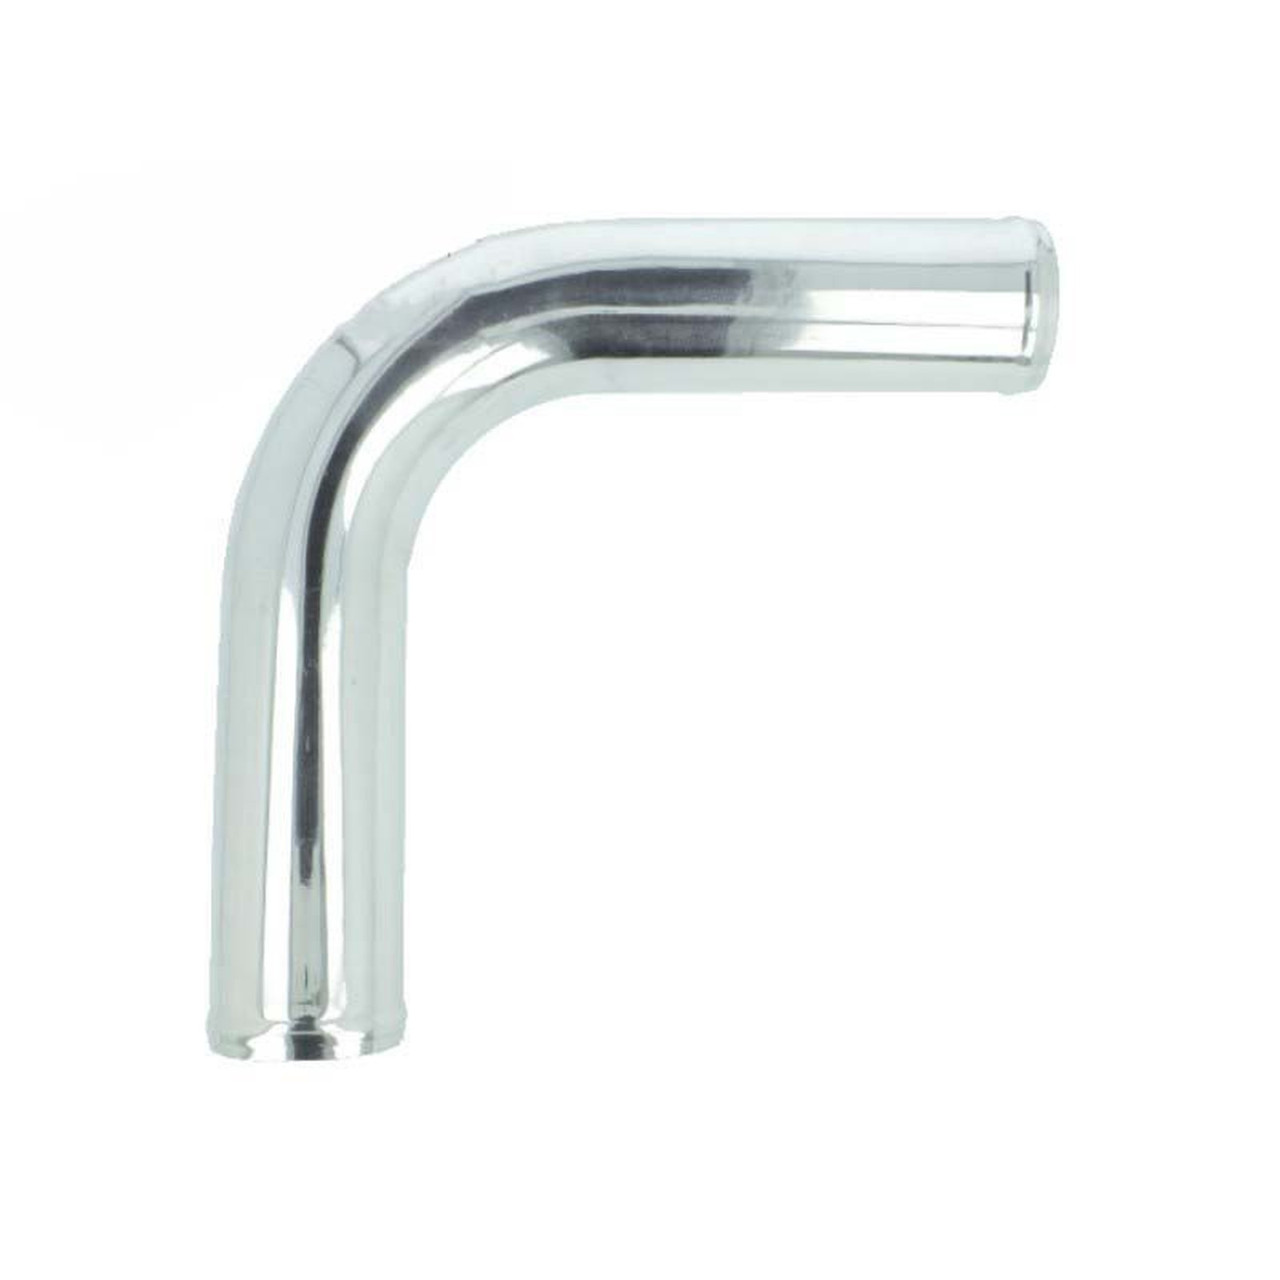 BOOST Products Aluminum Elbow 90 Degrees with 2" OD, Mandrel Bent, Polished (BOP-3102029050)